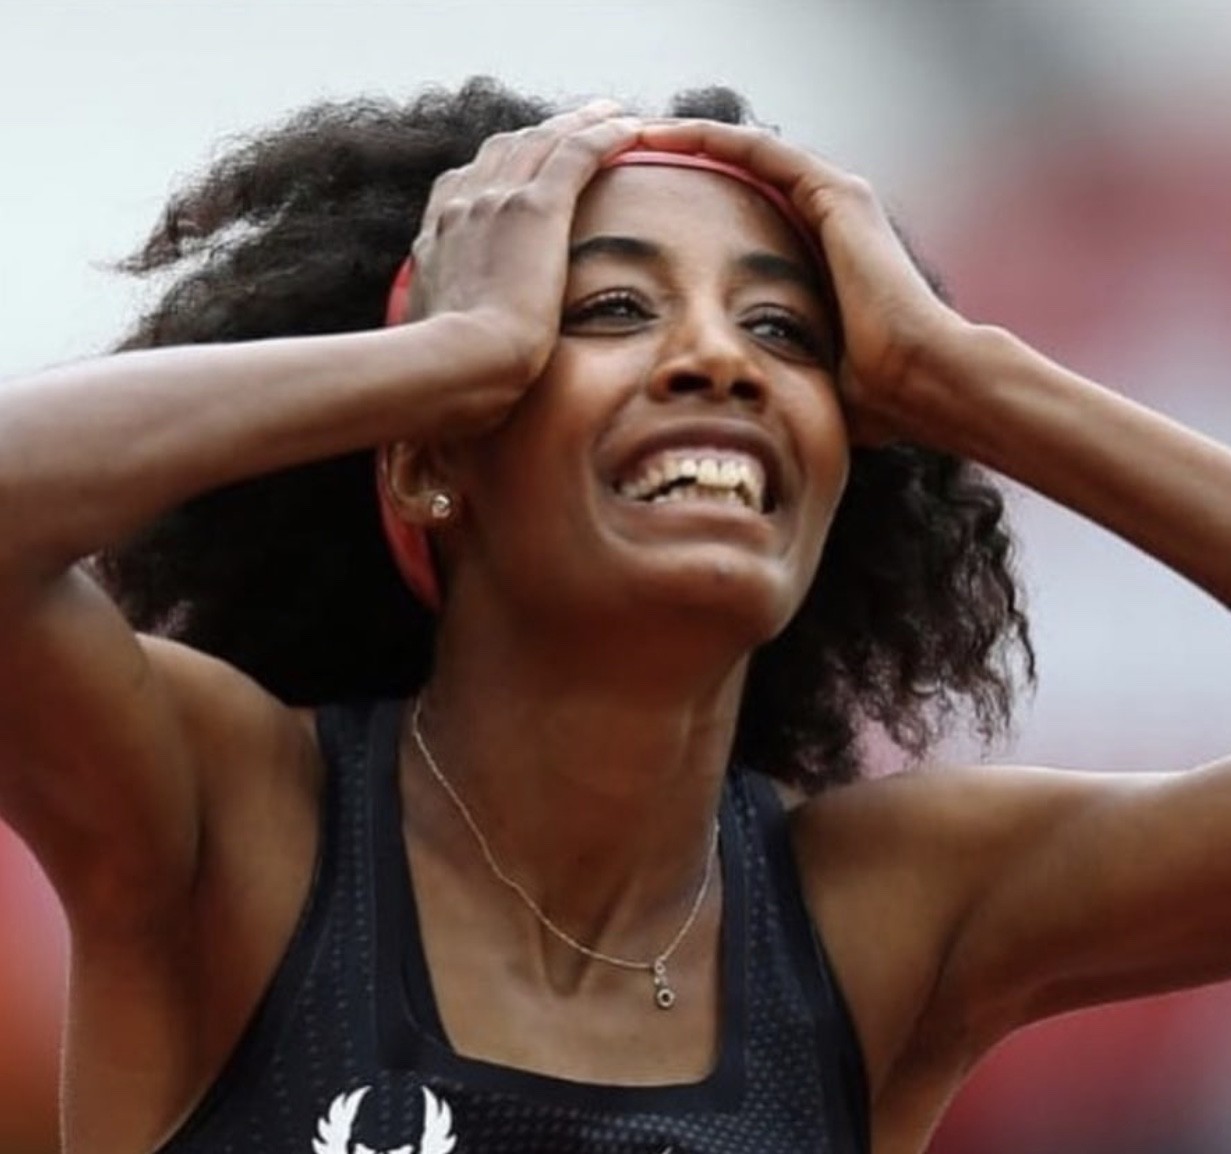 Sifan Hassan breaks women world record for the mile clocking 4:12.33 in Monaco